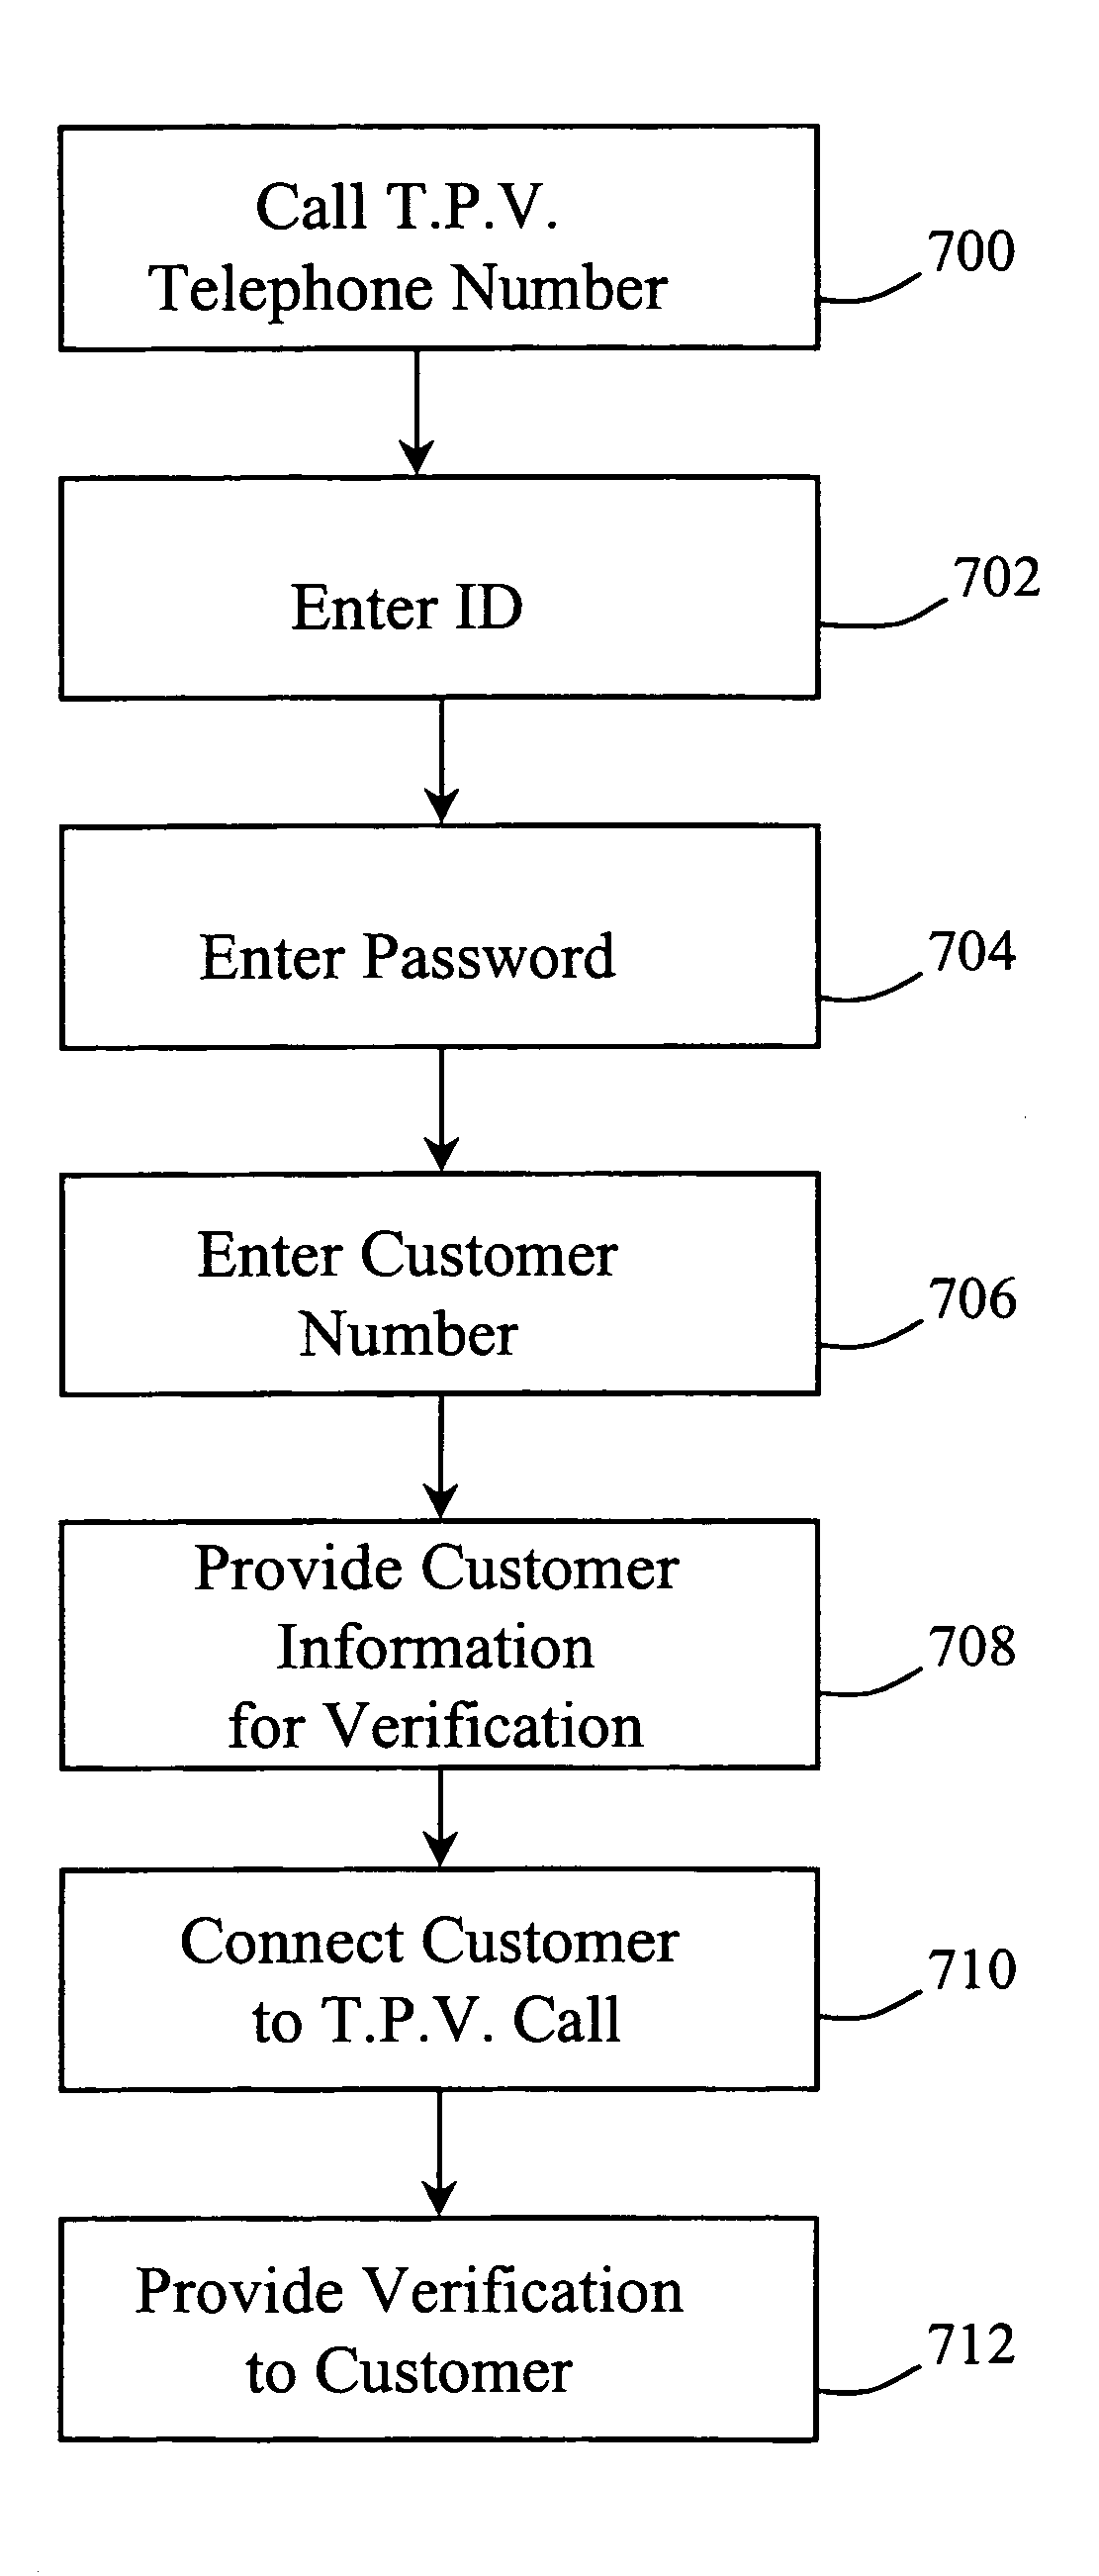 Automated third party verification system